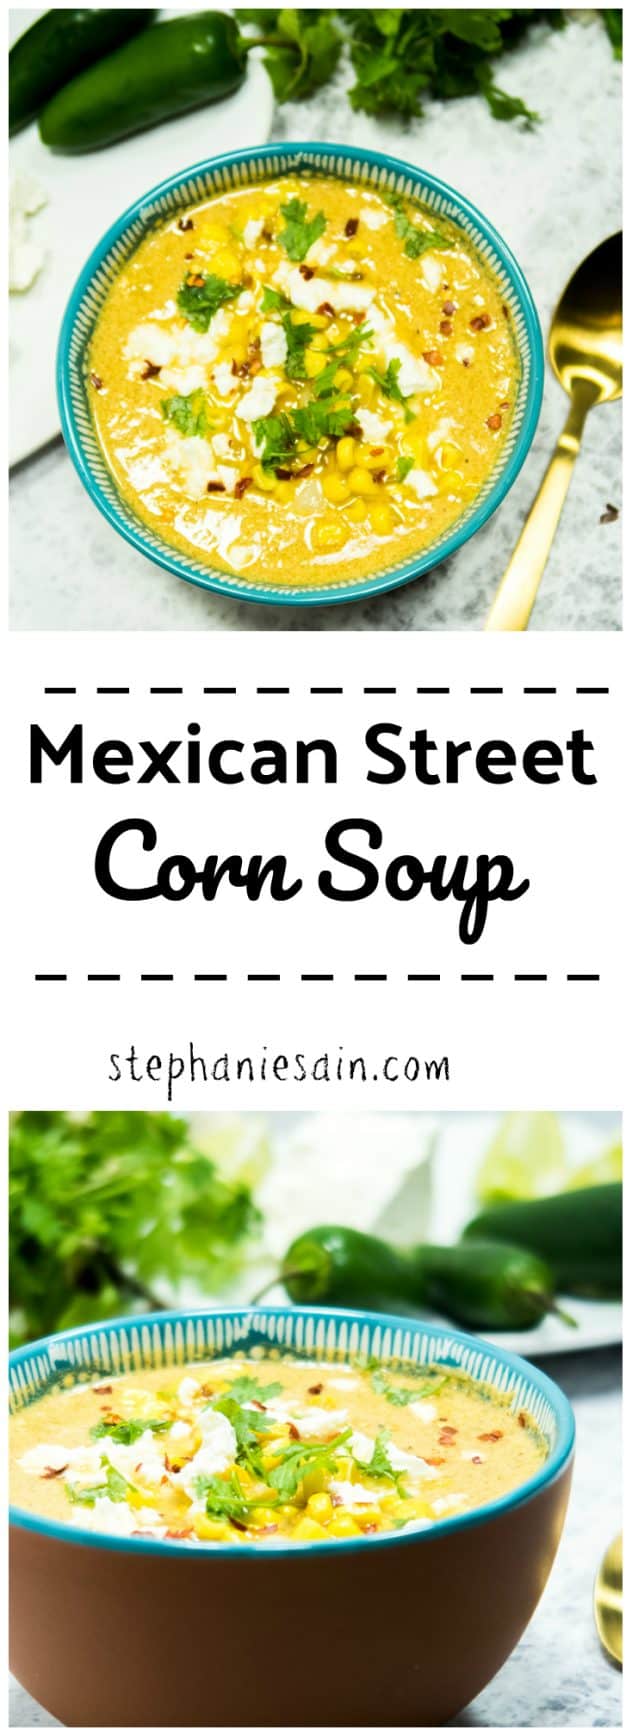 Mexican Street Corn Soup is a great way to enjoy the flavors of Mexican Street Corn in a warm cozy bowl of soup. Gluten free & Vegetarian.